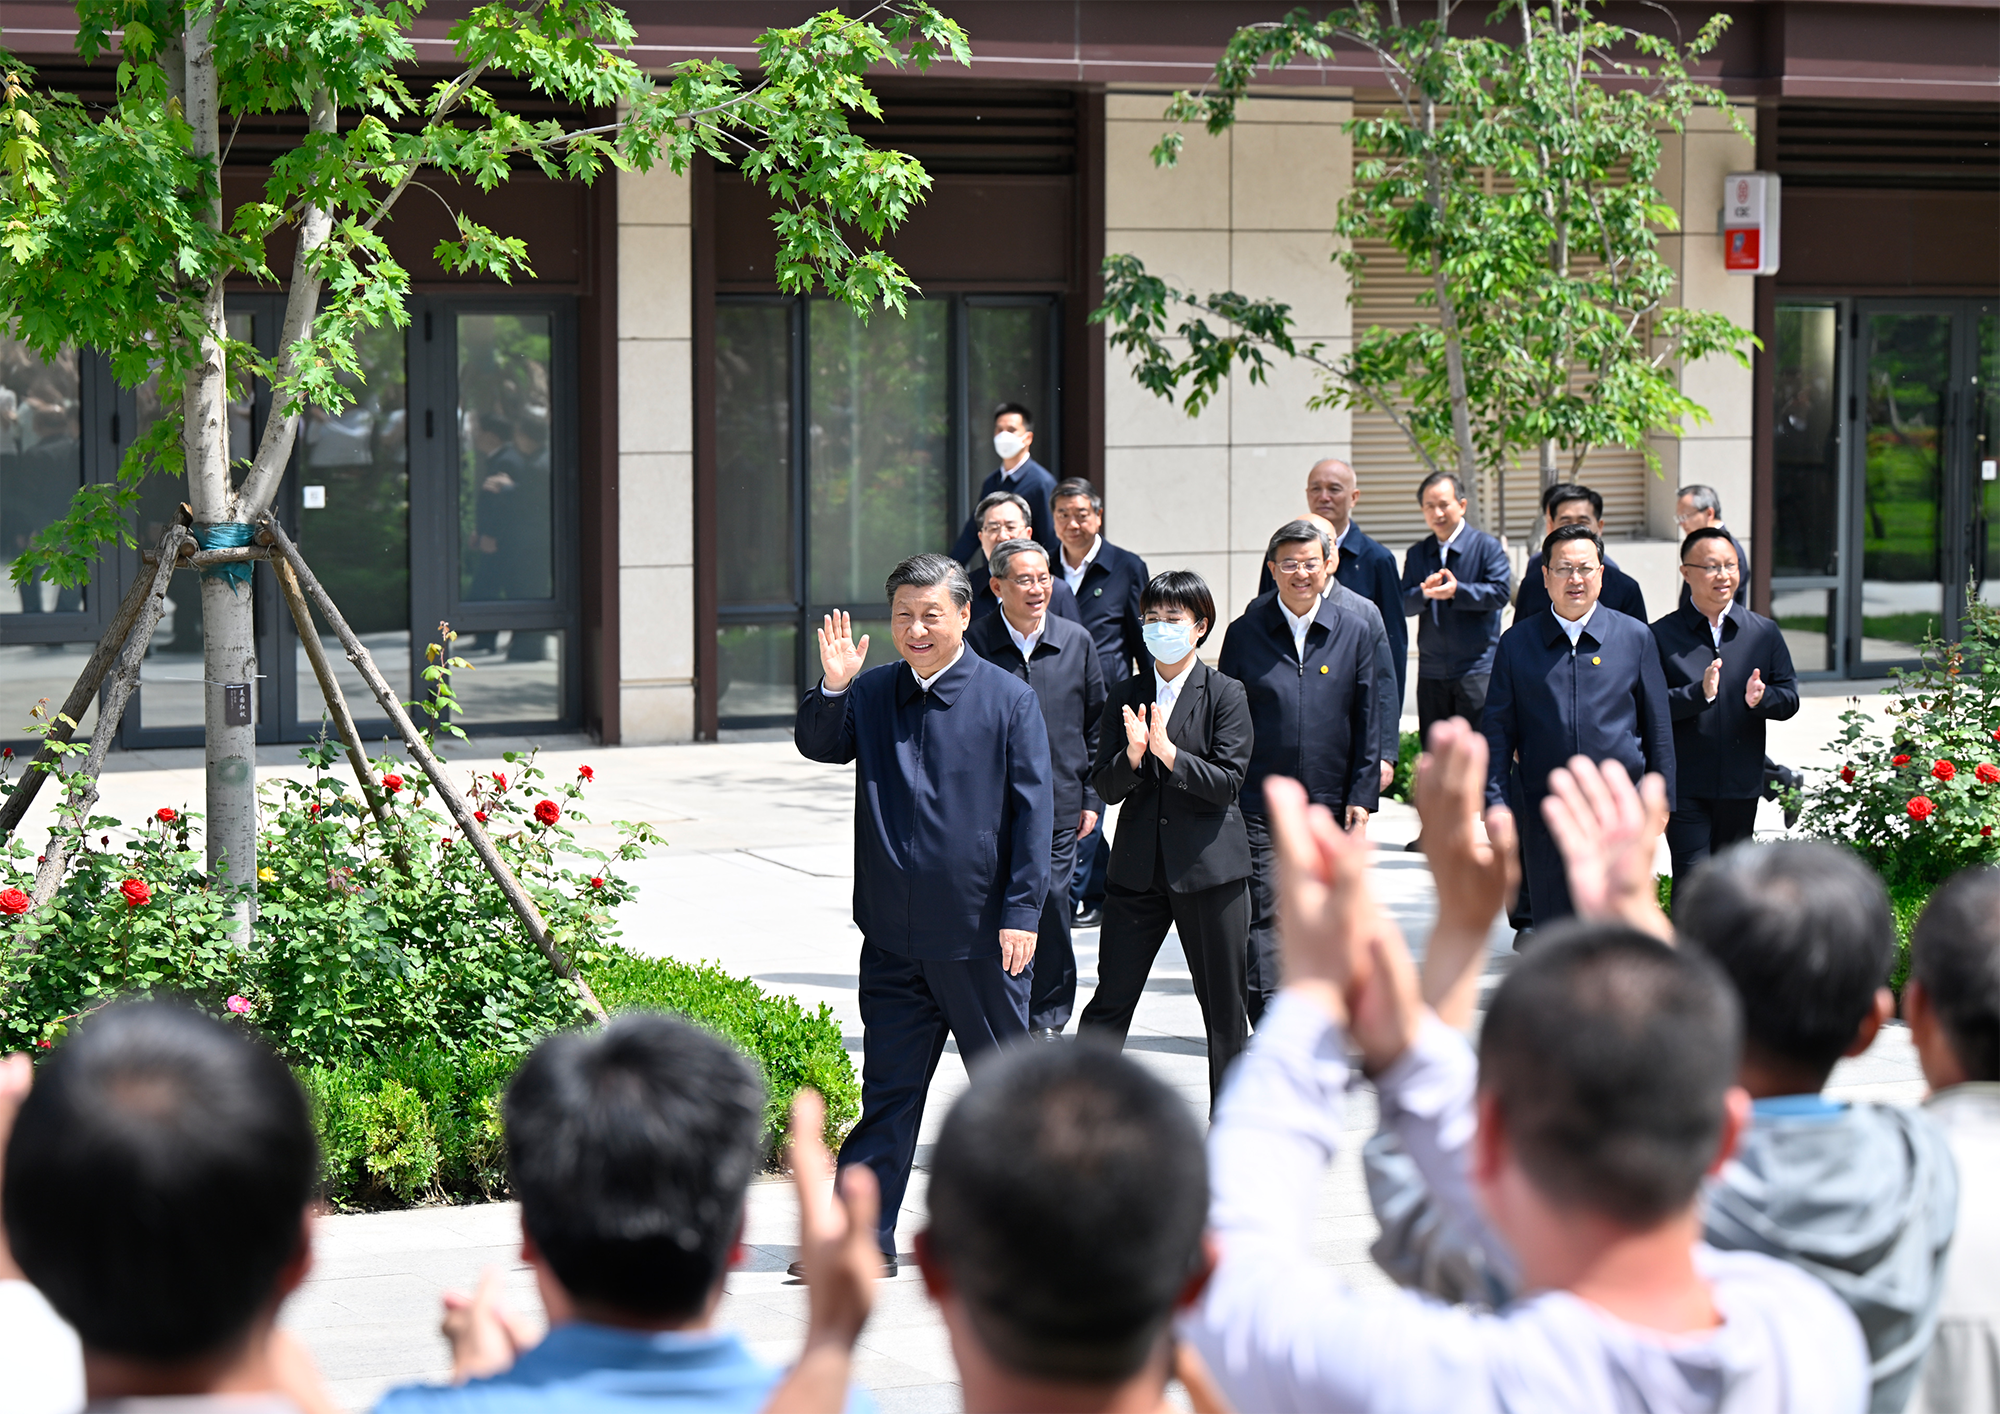 Chinese President Xi Jinping inspects the Xiong'an New Area in North China's Hebei Province on May 10, 2023. Xi, also general secretary of the Communist Party of China Central Committee and chairman of the Central Military Commission, presided over a meeting on promoting the development of the Xiong'an New Area during his trip. Photo: Xinhua